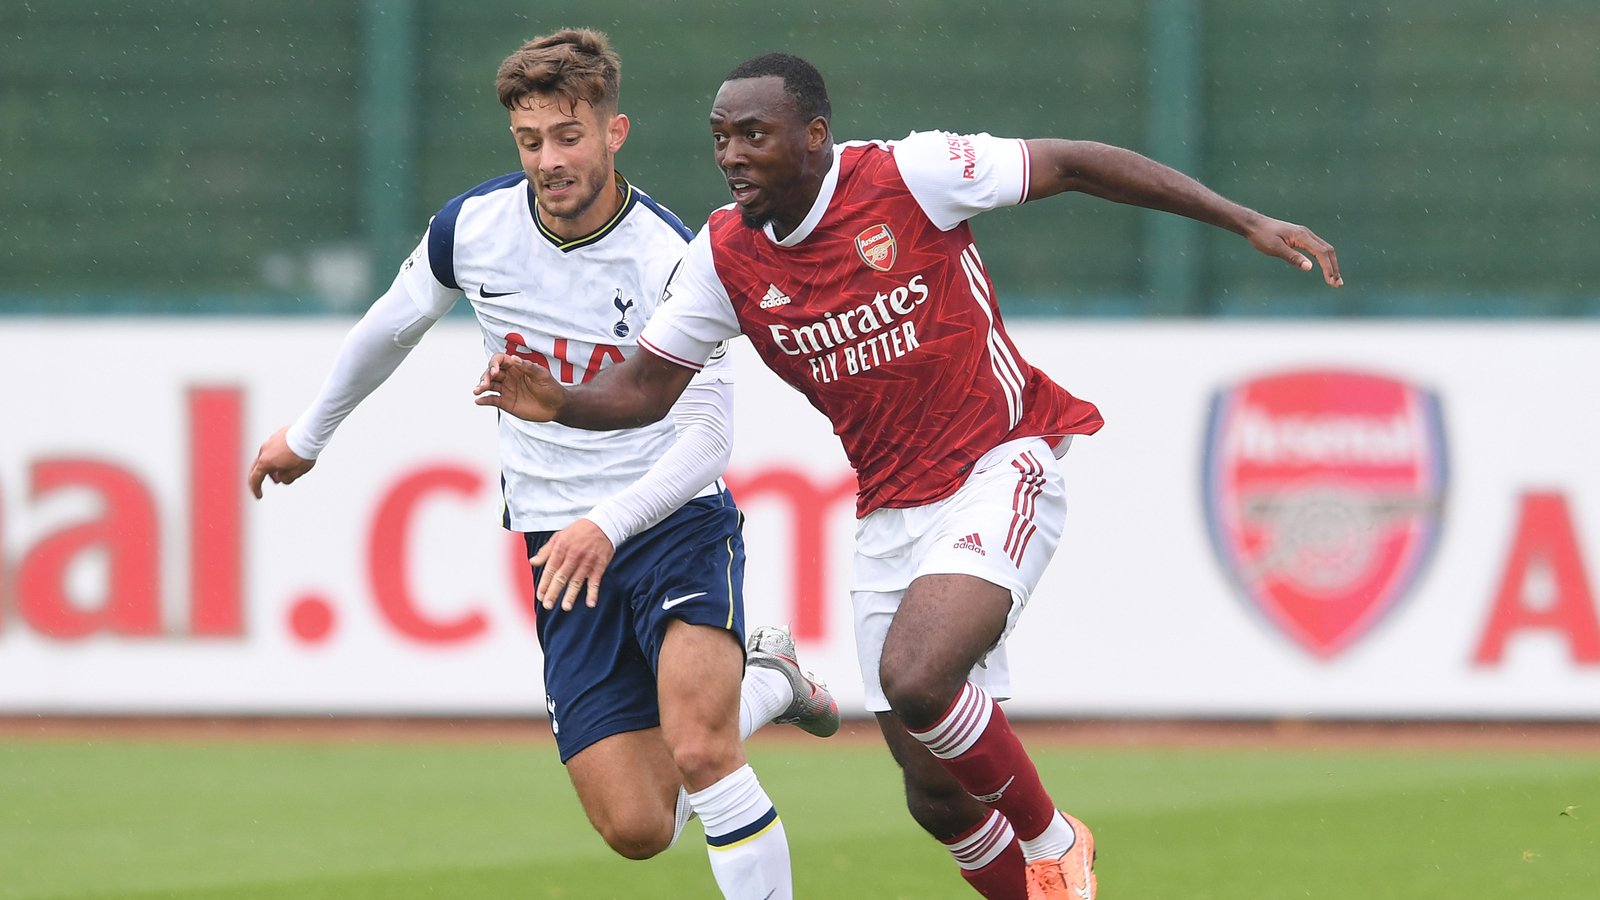 Bola joins Rotherham United in permanent deal | News | Arsenal.com